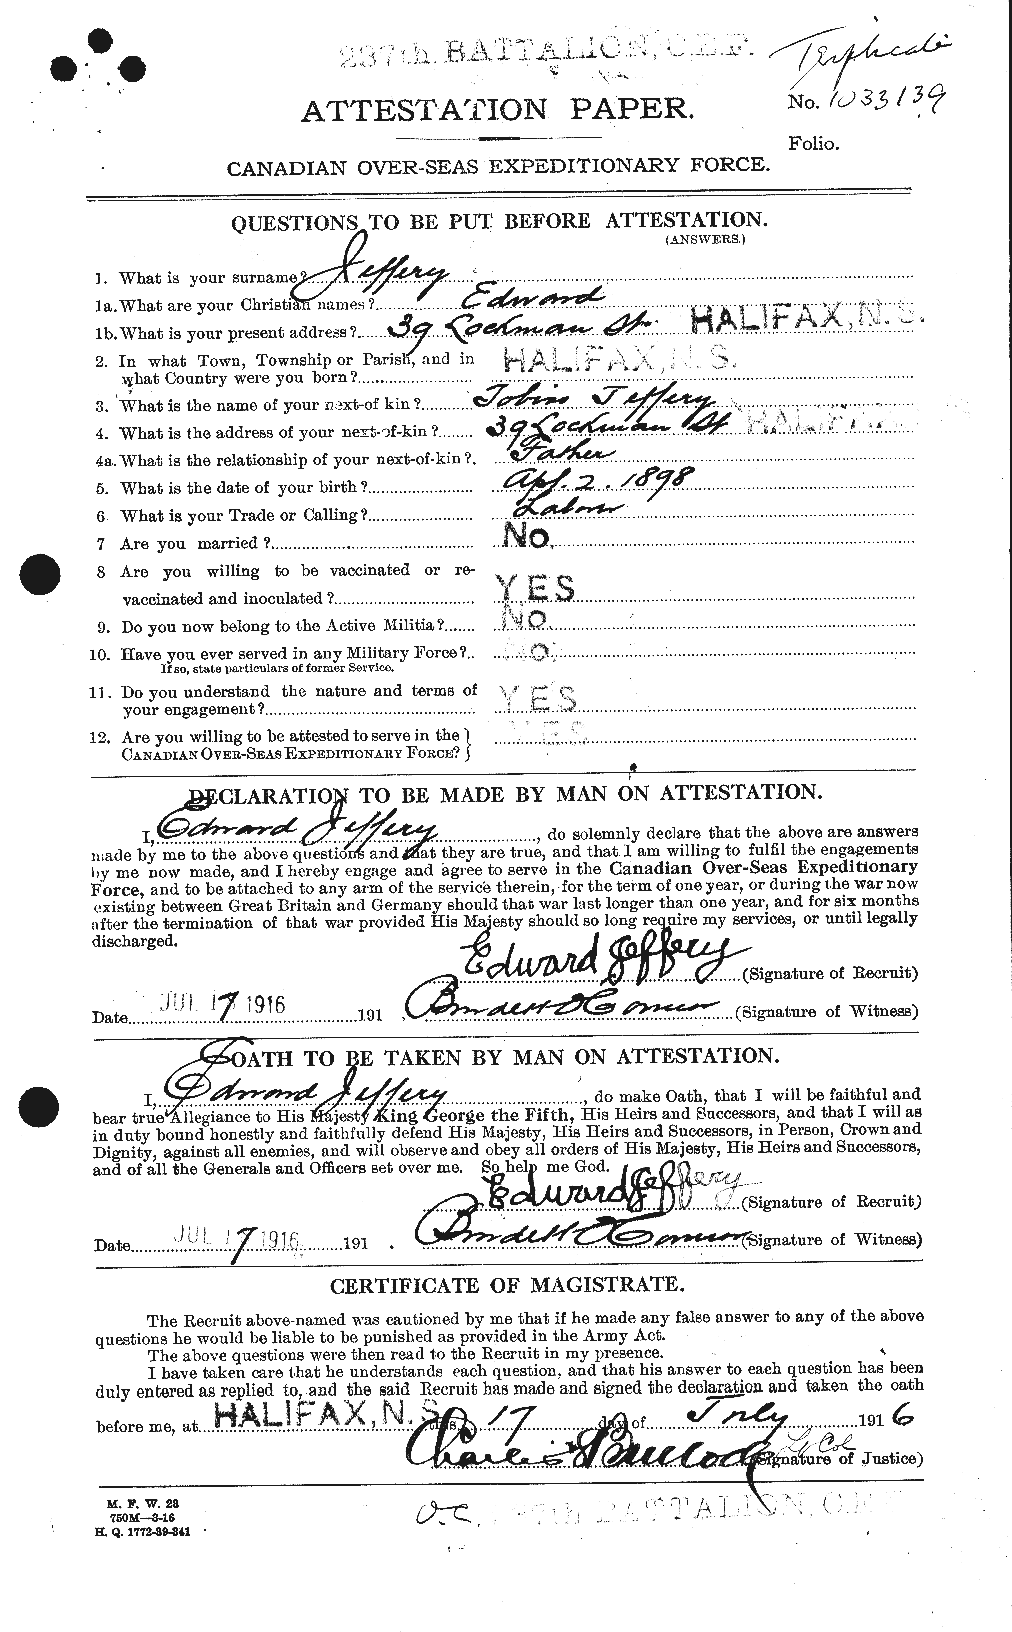 Personnel Records of the First World War - CEF 417729a